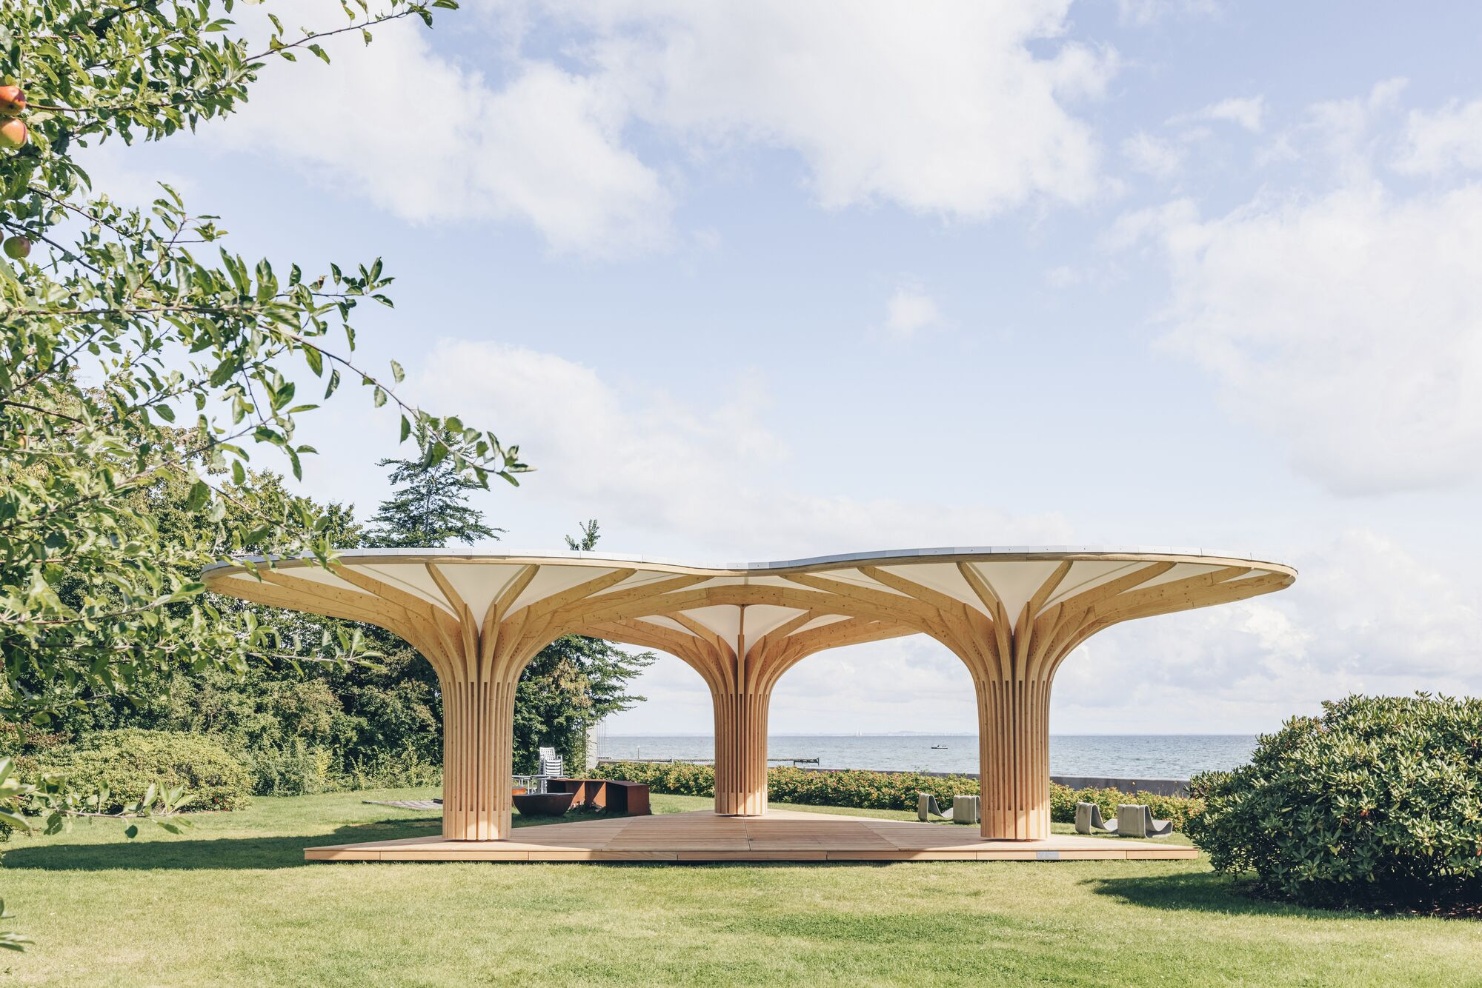 Three timber structures with a membrane covering form the pavilion ‘Into the woods’